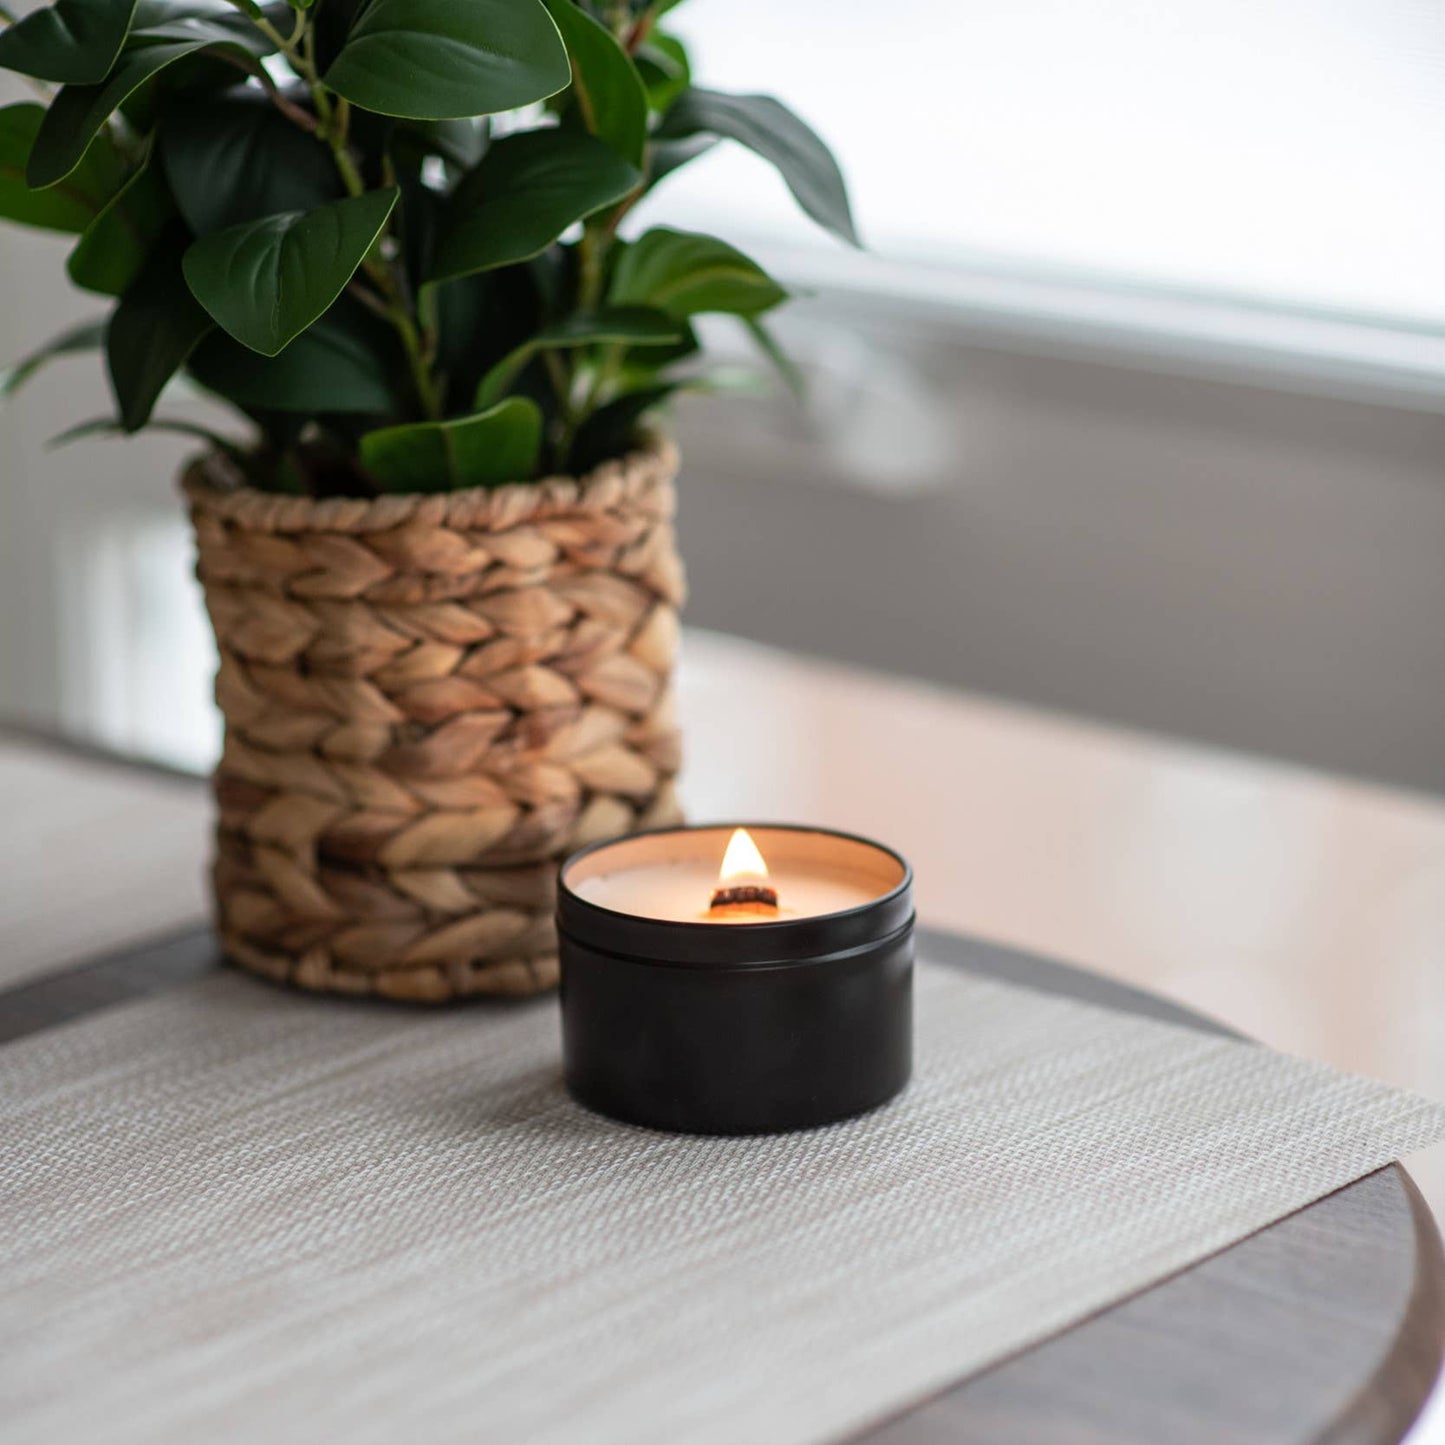 Spruce it Up Wood Wick Soy Candle